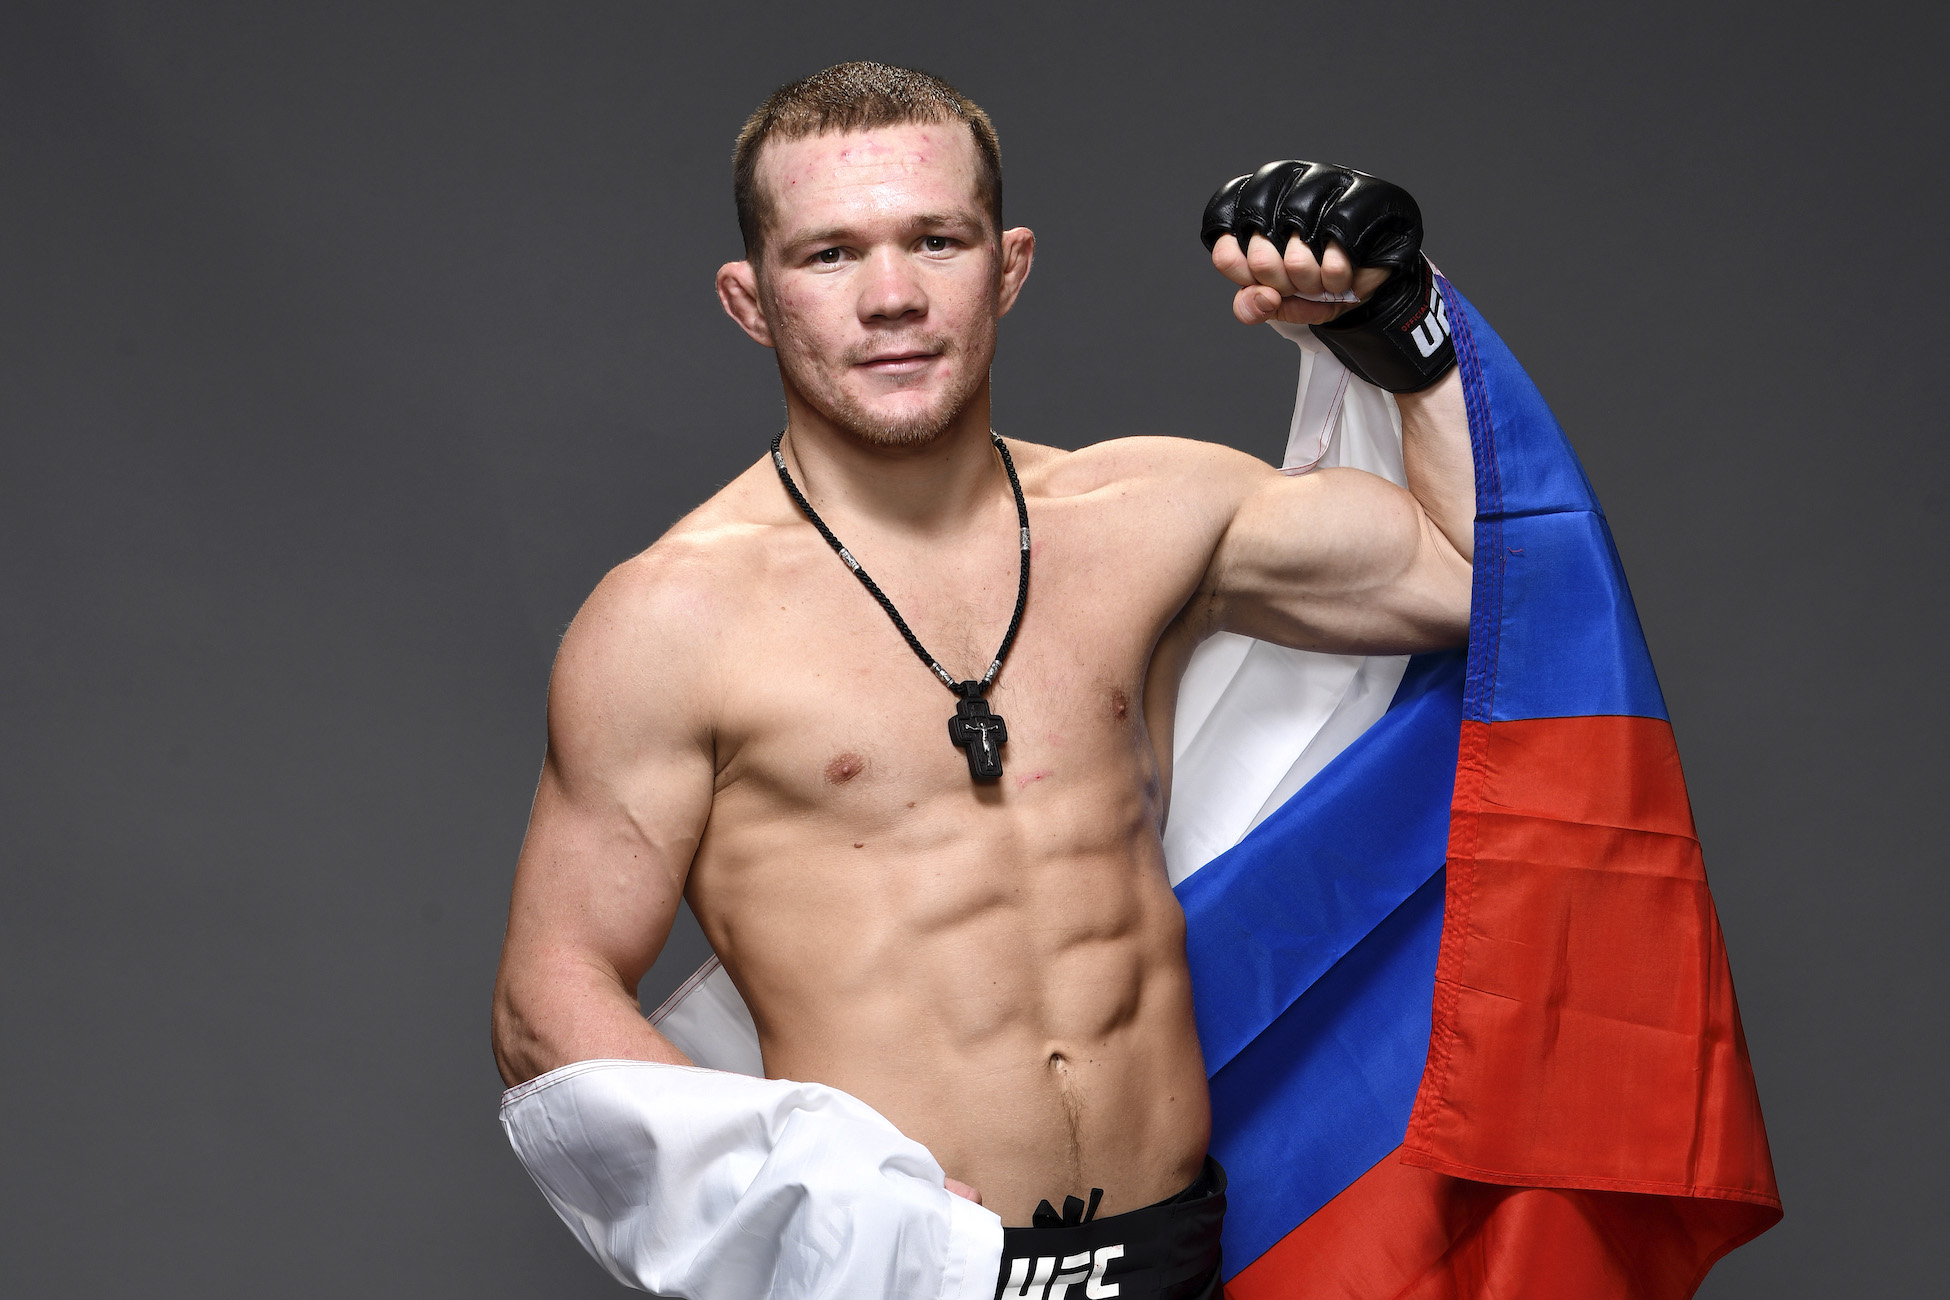 Petr Yan constantly got in trouble as a child for starting fights on the street and in school, but it's helped him succeed in the UFC.